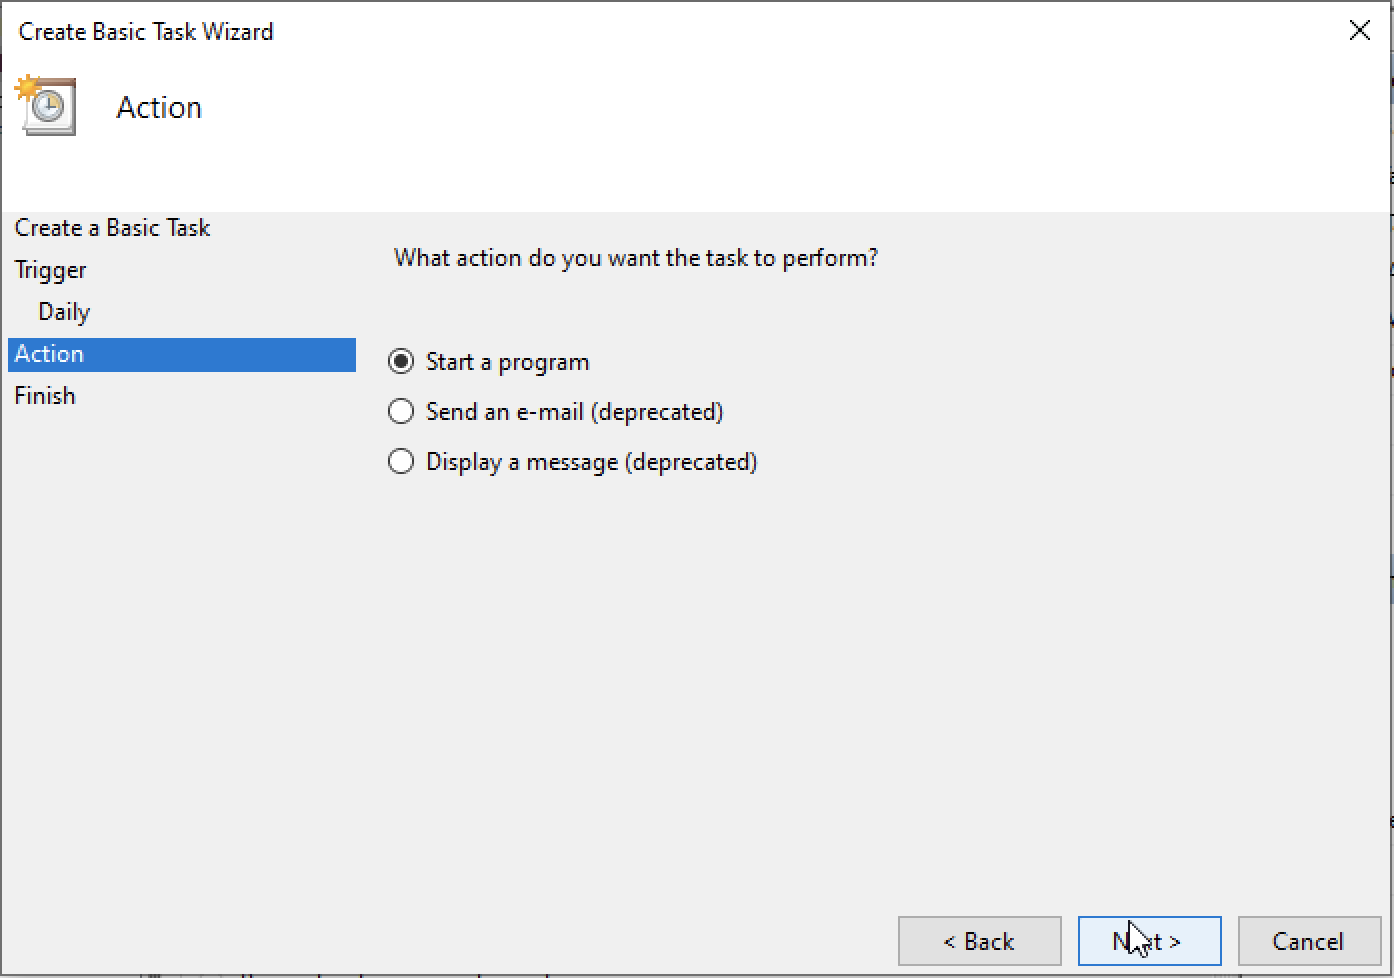 Start a program is one of three options in the Action menu.